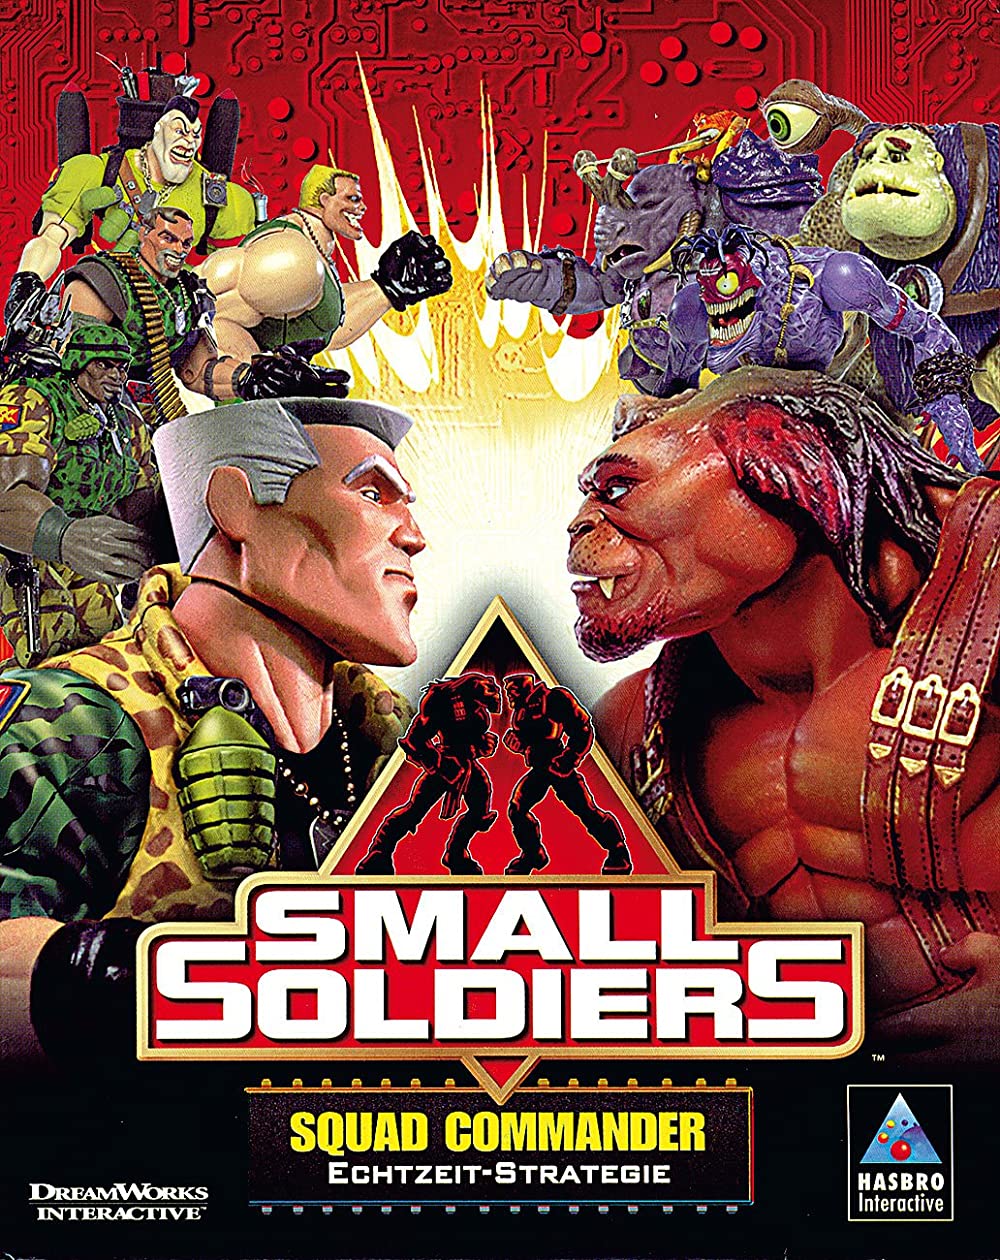 Small Soldiers: Squad Commander (Video Game 1998)